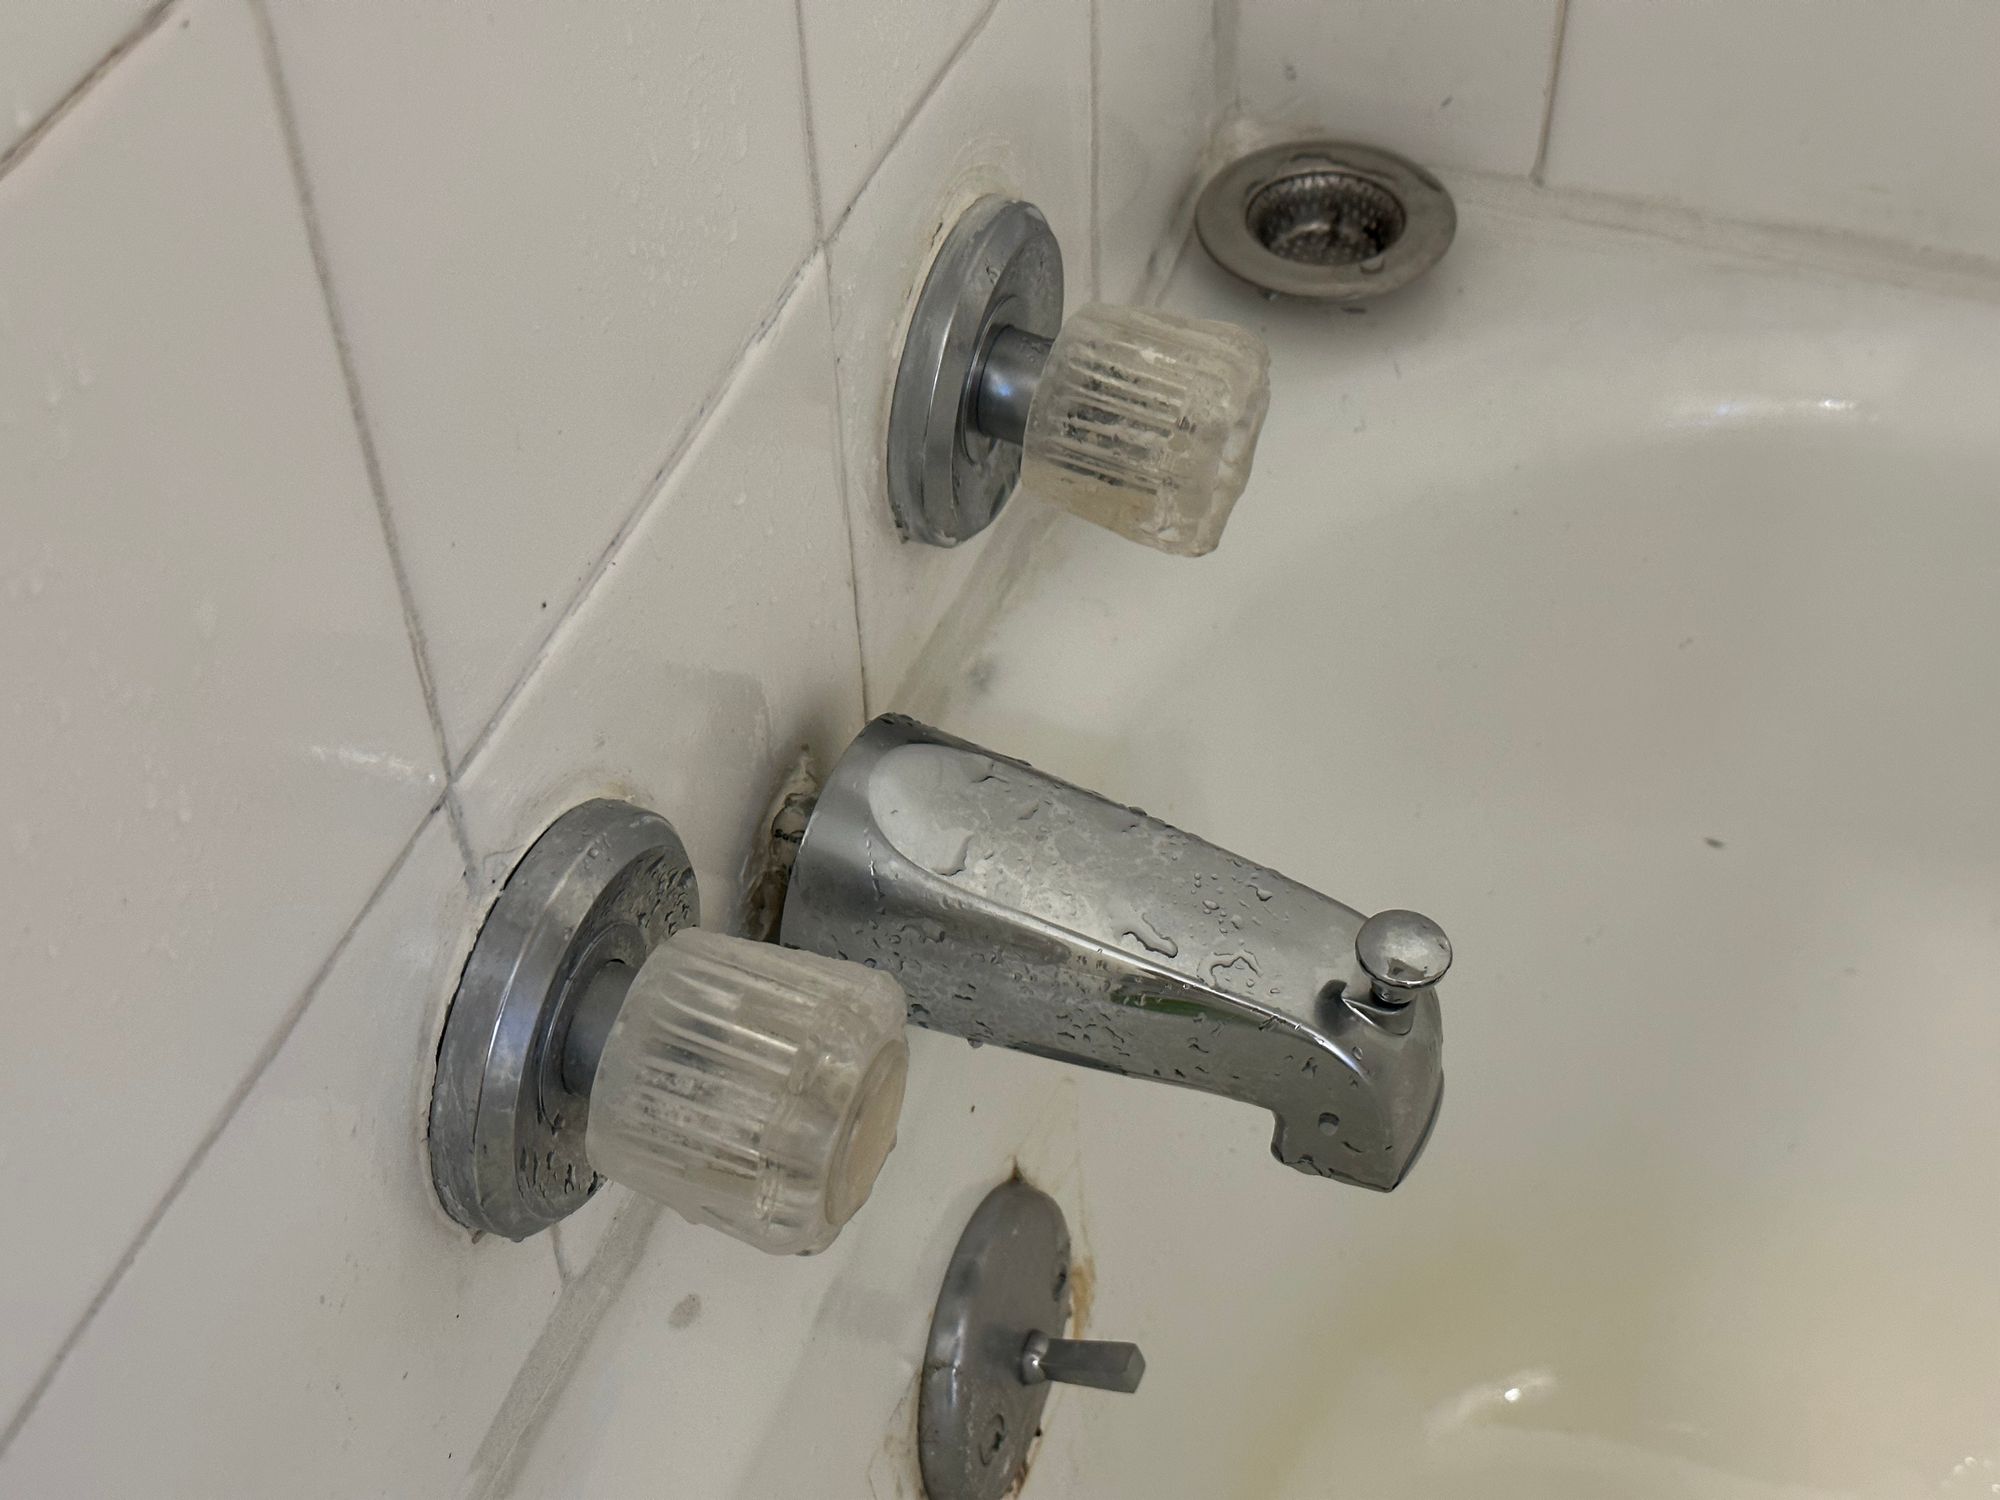 Shower fittings & finishes